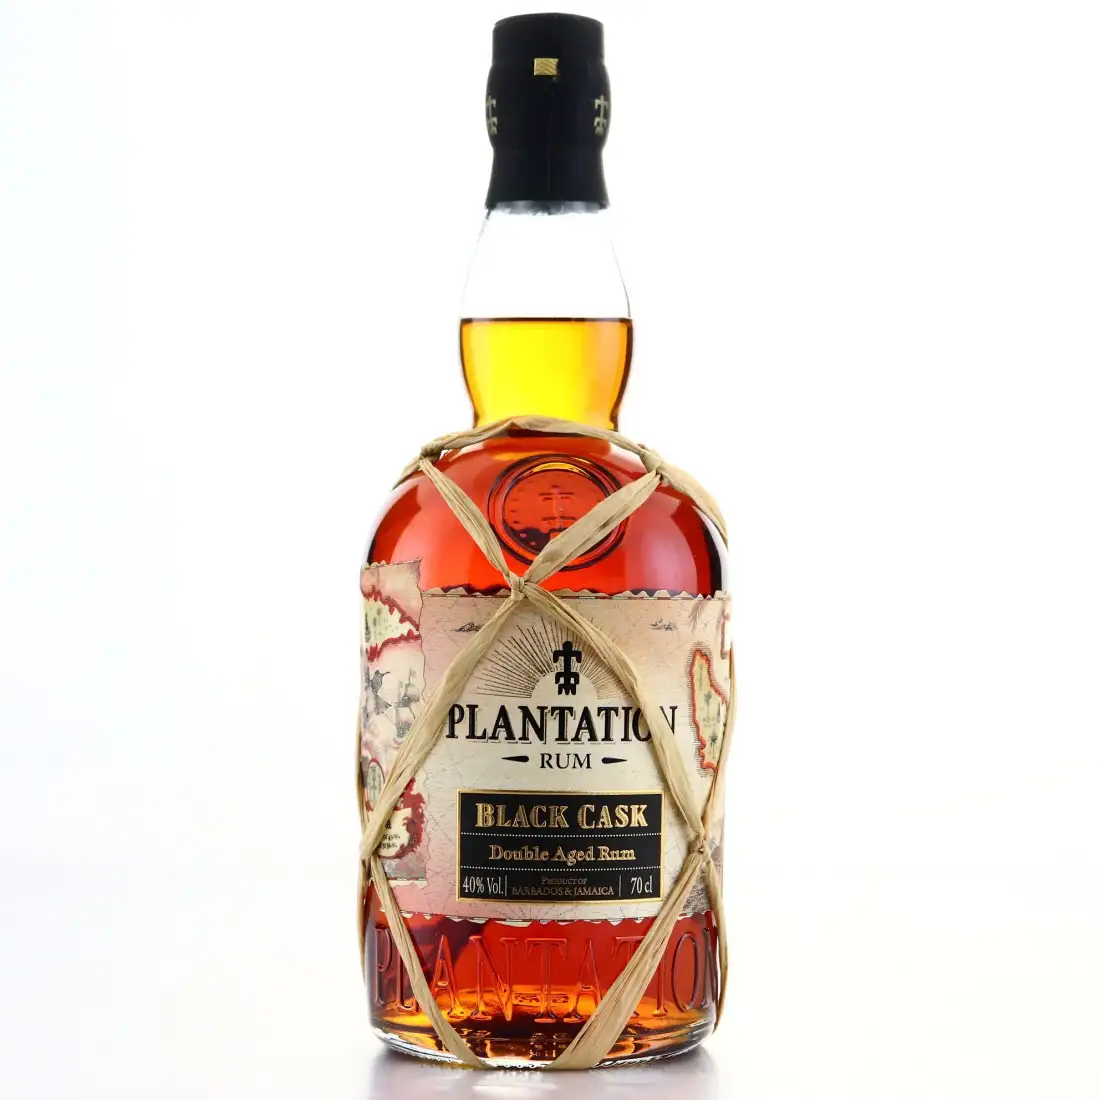 Image of the front of the bottle of the rum Plantation Black Cask Barbados & Jamaica